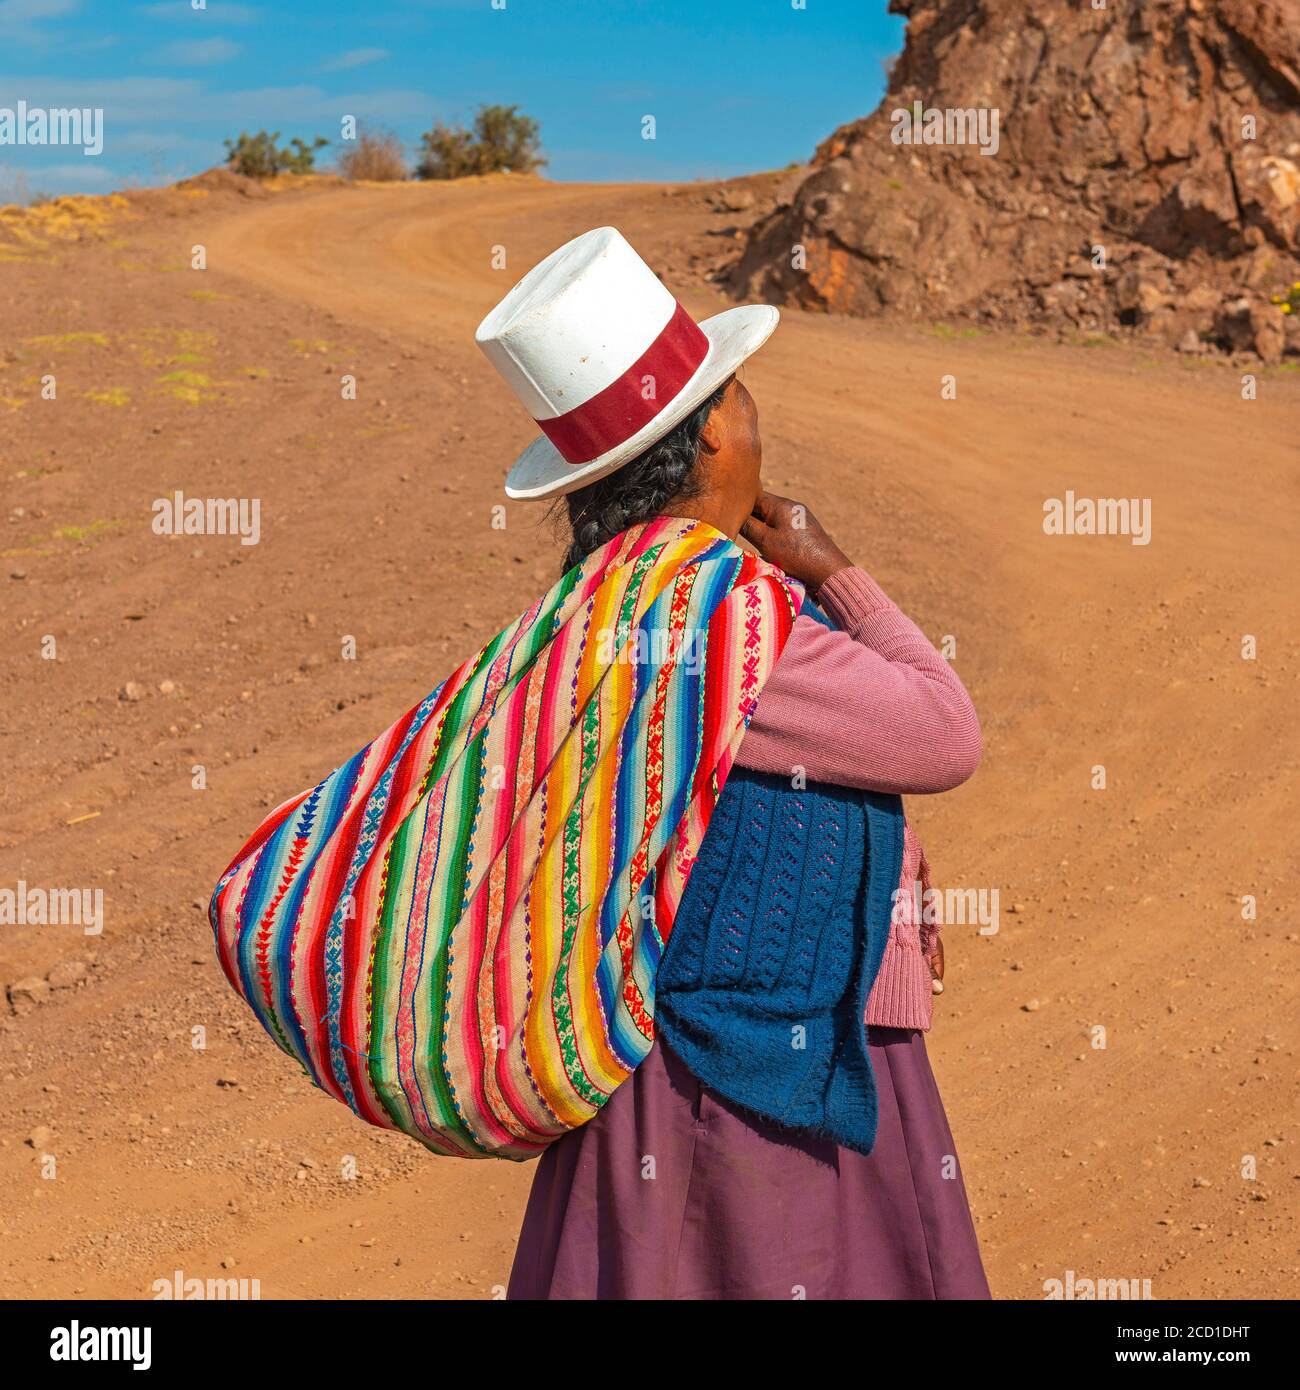 Indigenous peruvian Quechua woman with traditional hat and textile along a Andes road, Sacred Valley of the Inca, Cusco, Peru. Stock Photo